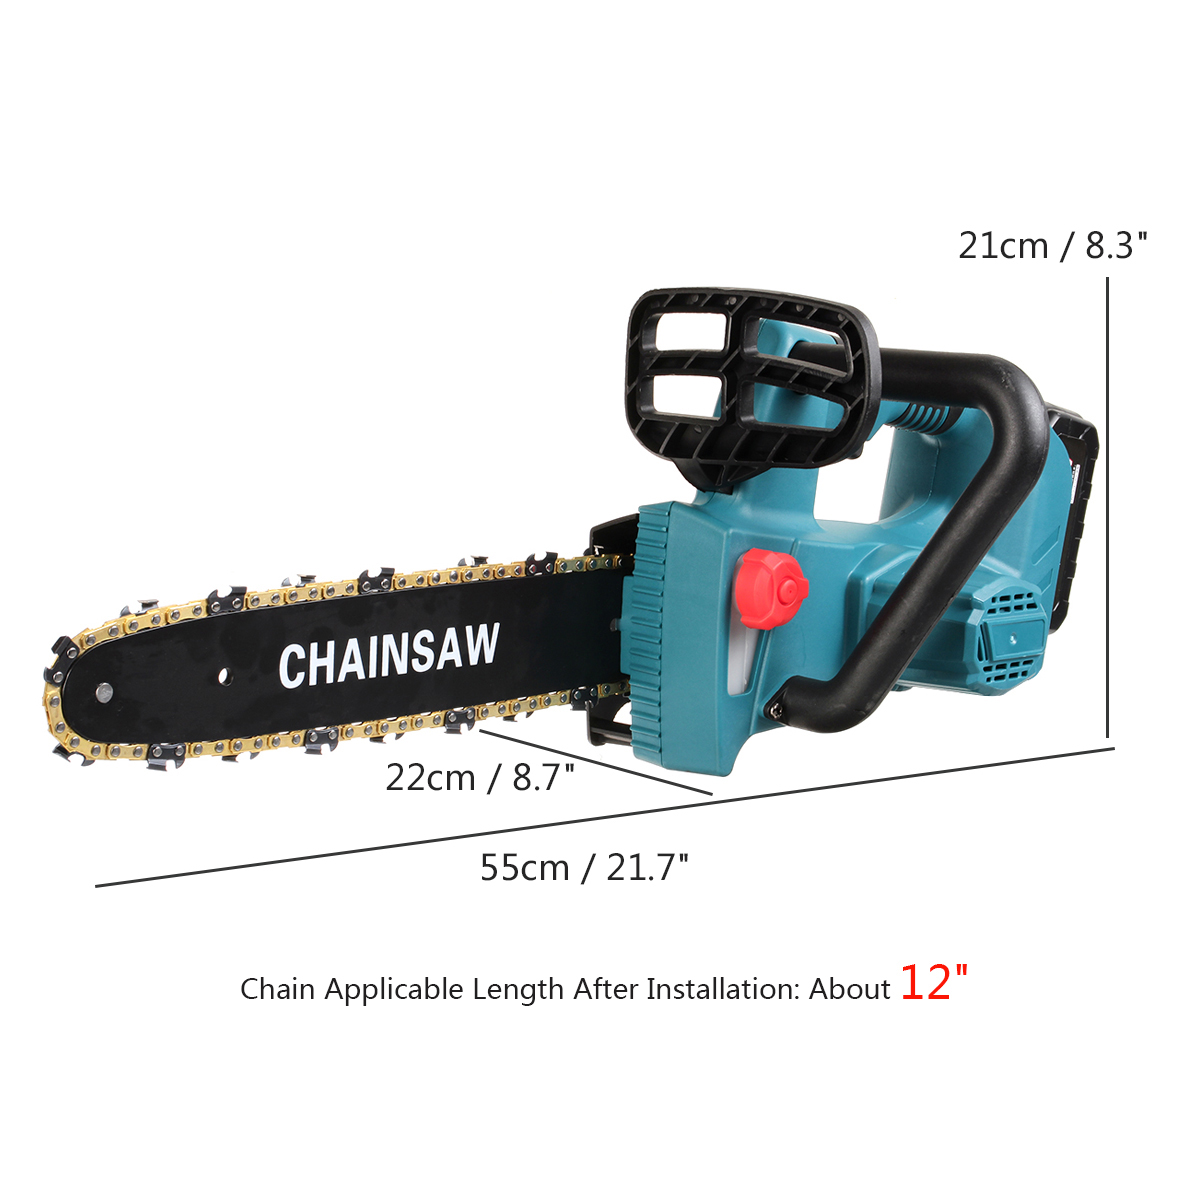 5ms-Portable-Electric-Brushless-Saw-Pruning-Chain-Saw-Rechargeable-Woodworking-Power-Tools-Wood-Cutt-1909228-8